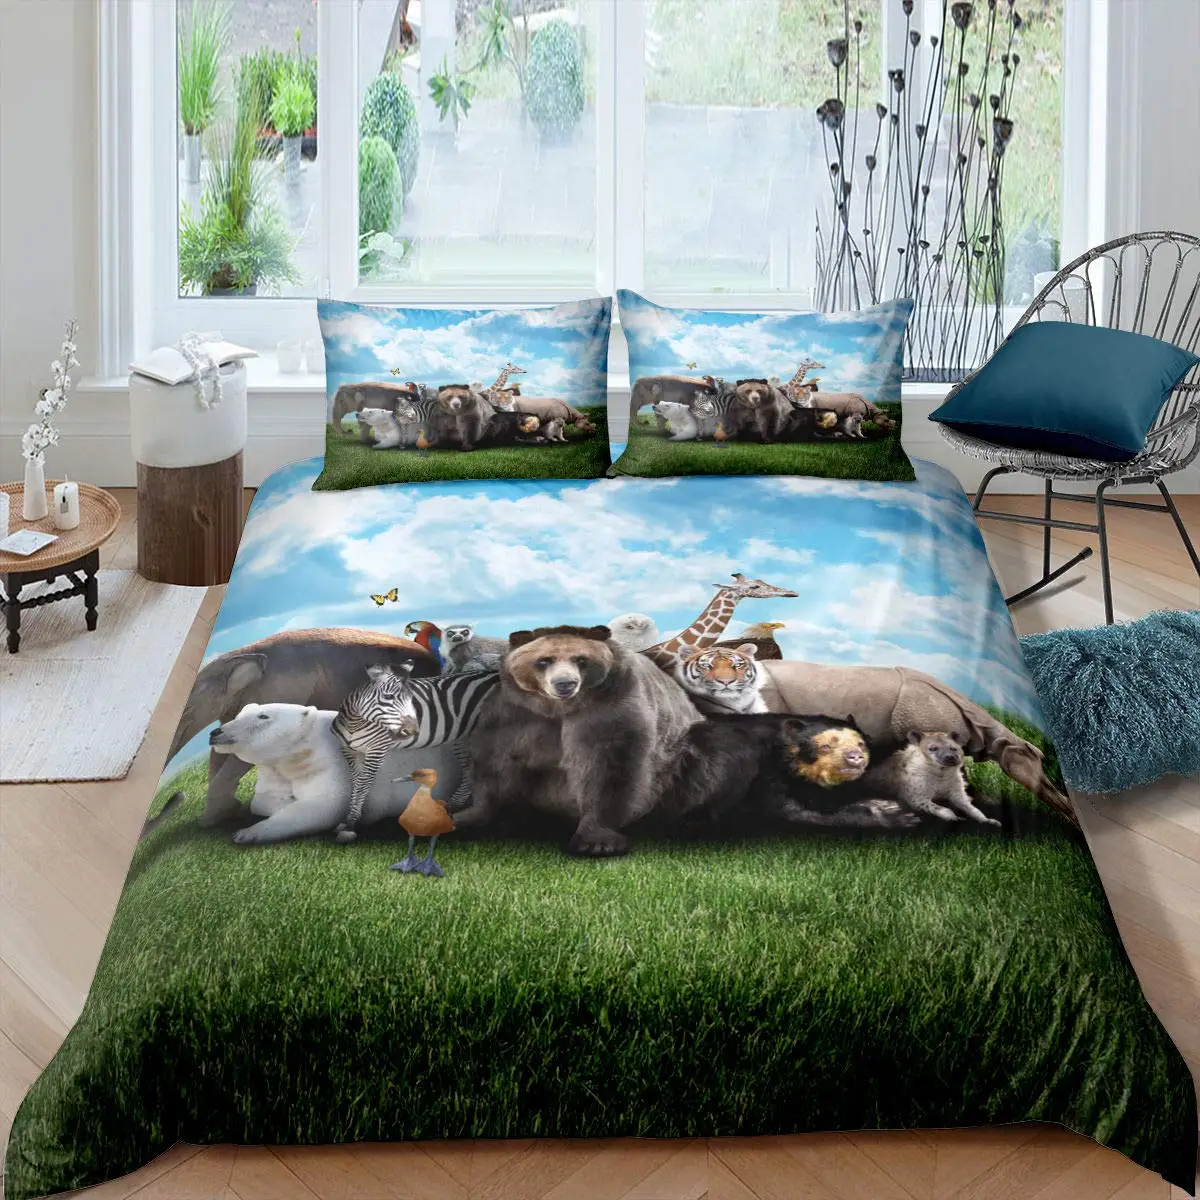 

Cartoon Animals Duvet Cover Set Kids Zoo Polyester Quilt Cover King Size Savannah Tropical Forest Jungle Wildlife Bedding Set